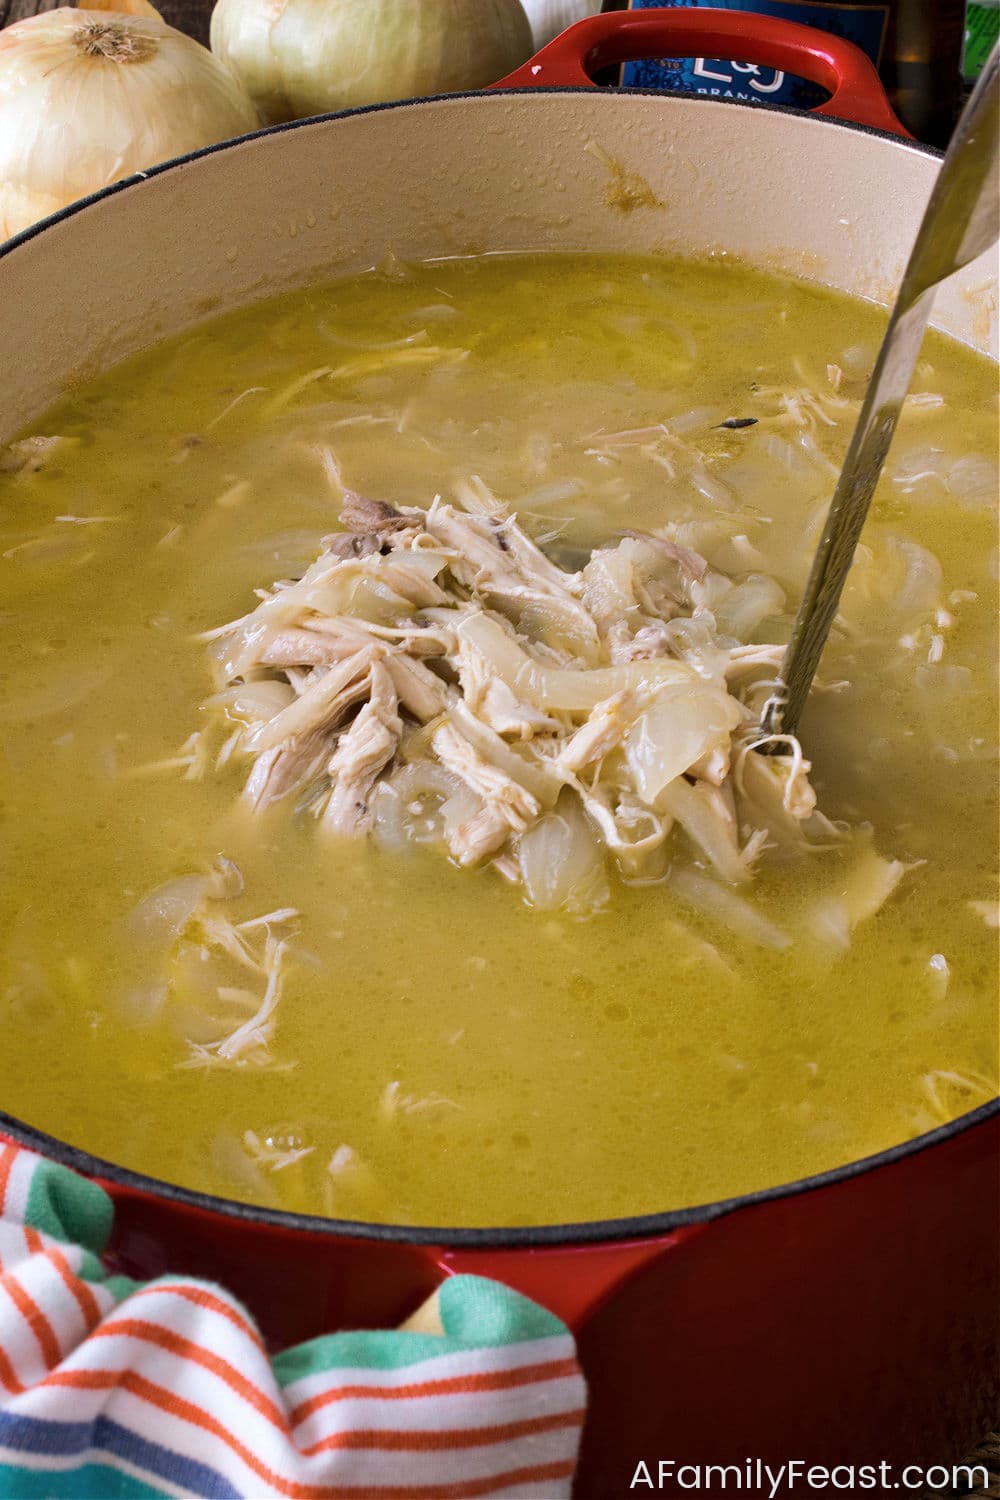 French Onion Chicken Soup - A Family Feast